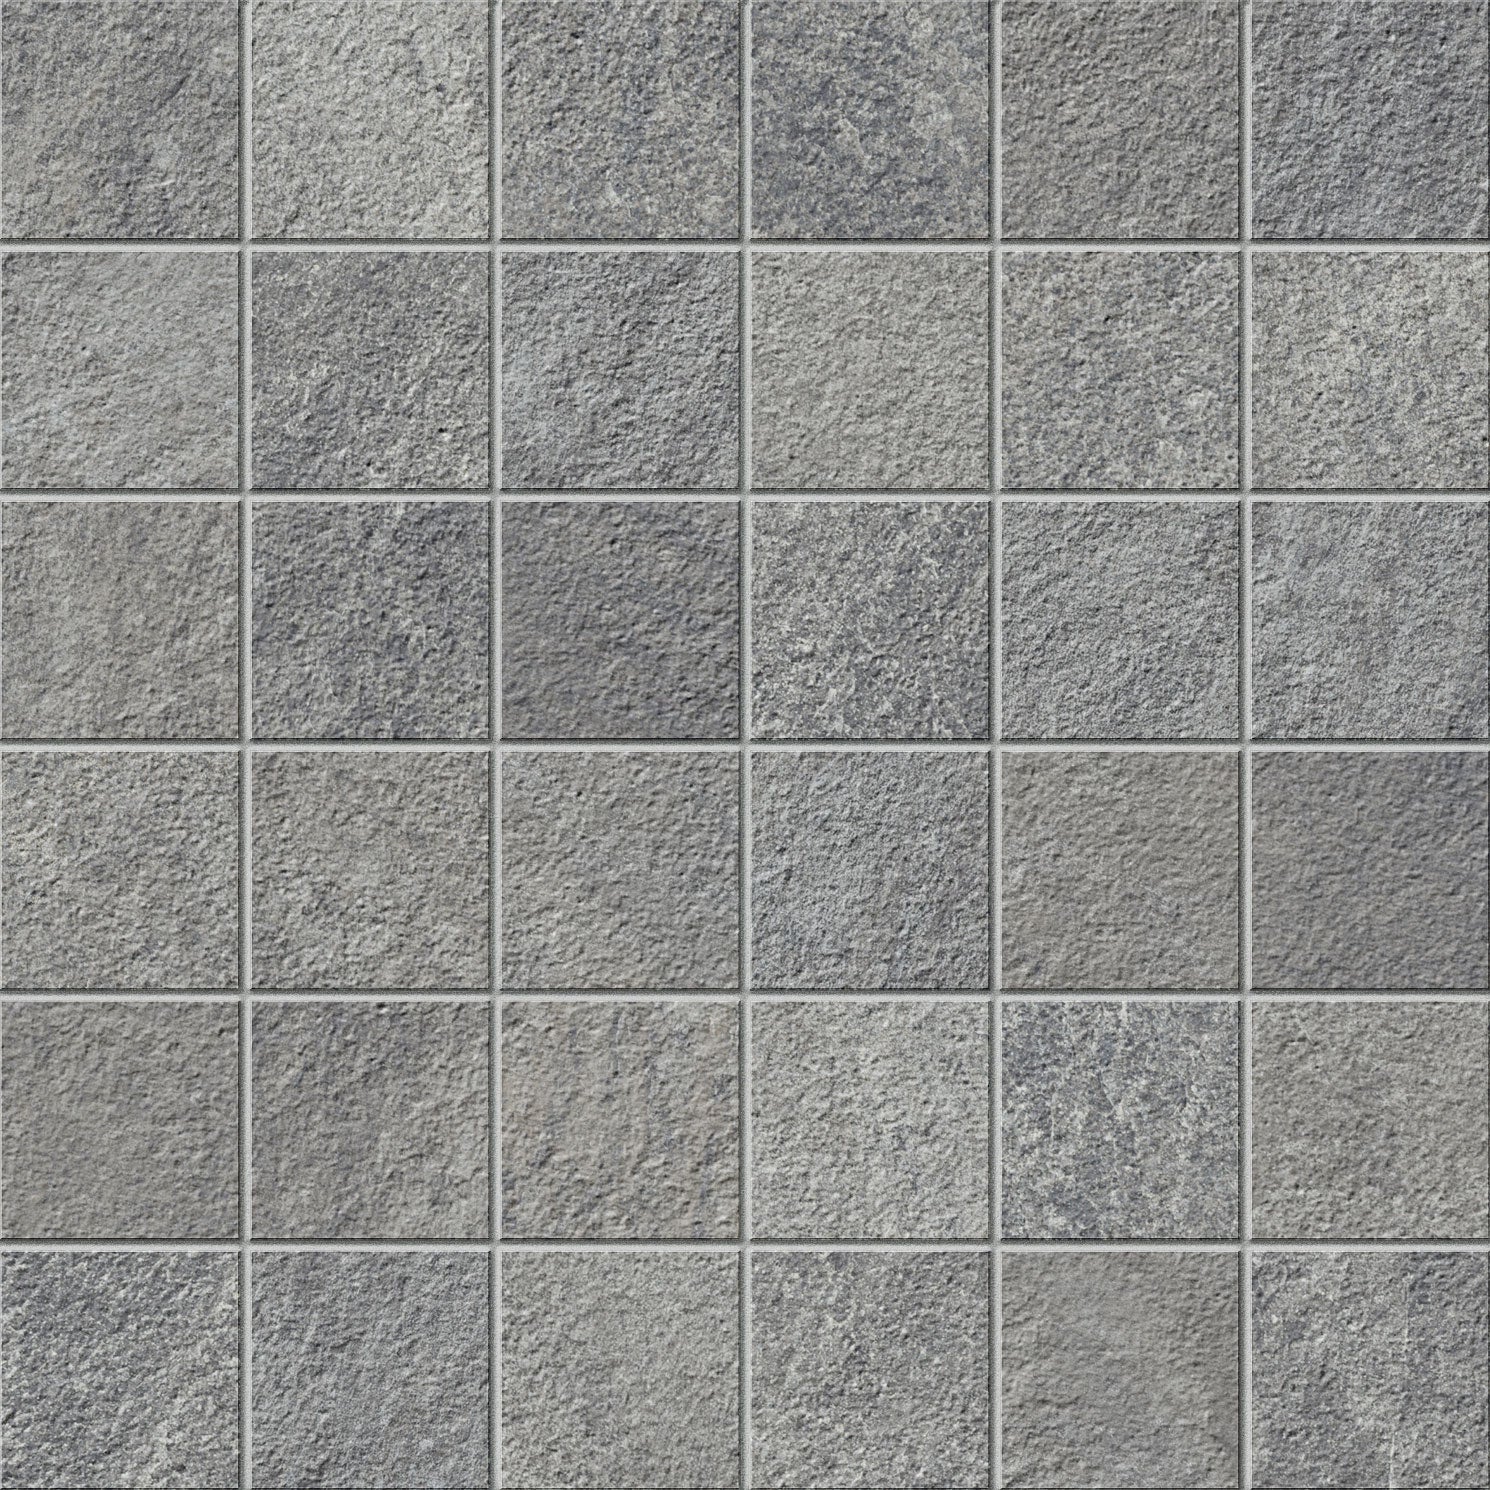 landmark 9mm explore everest dark straight stack 2x2 mosaic 12x12x9mm matte rectified porcelain tile distributed by surface group international